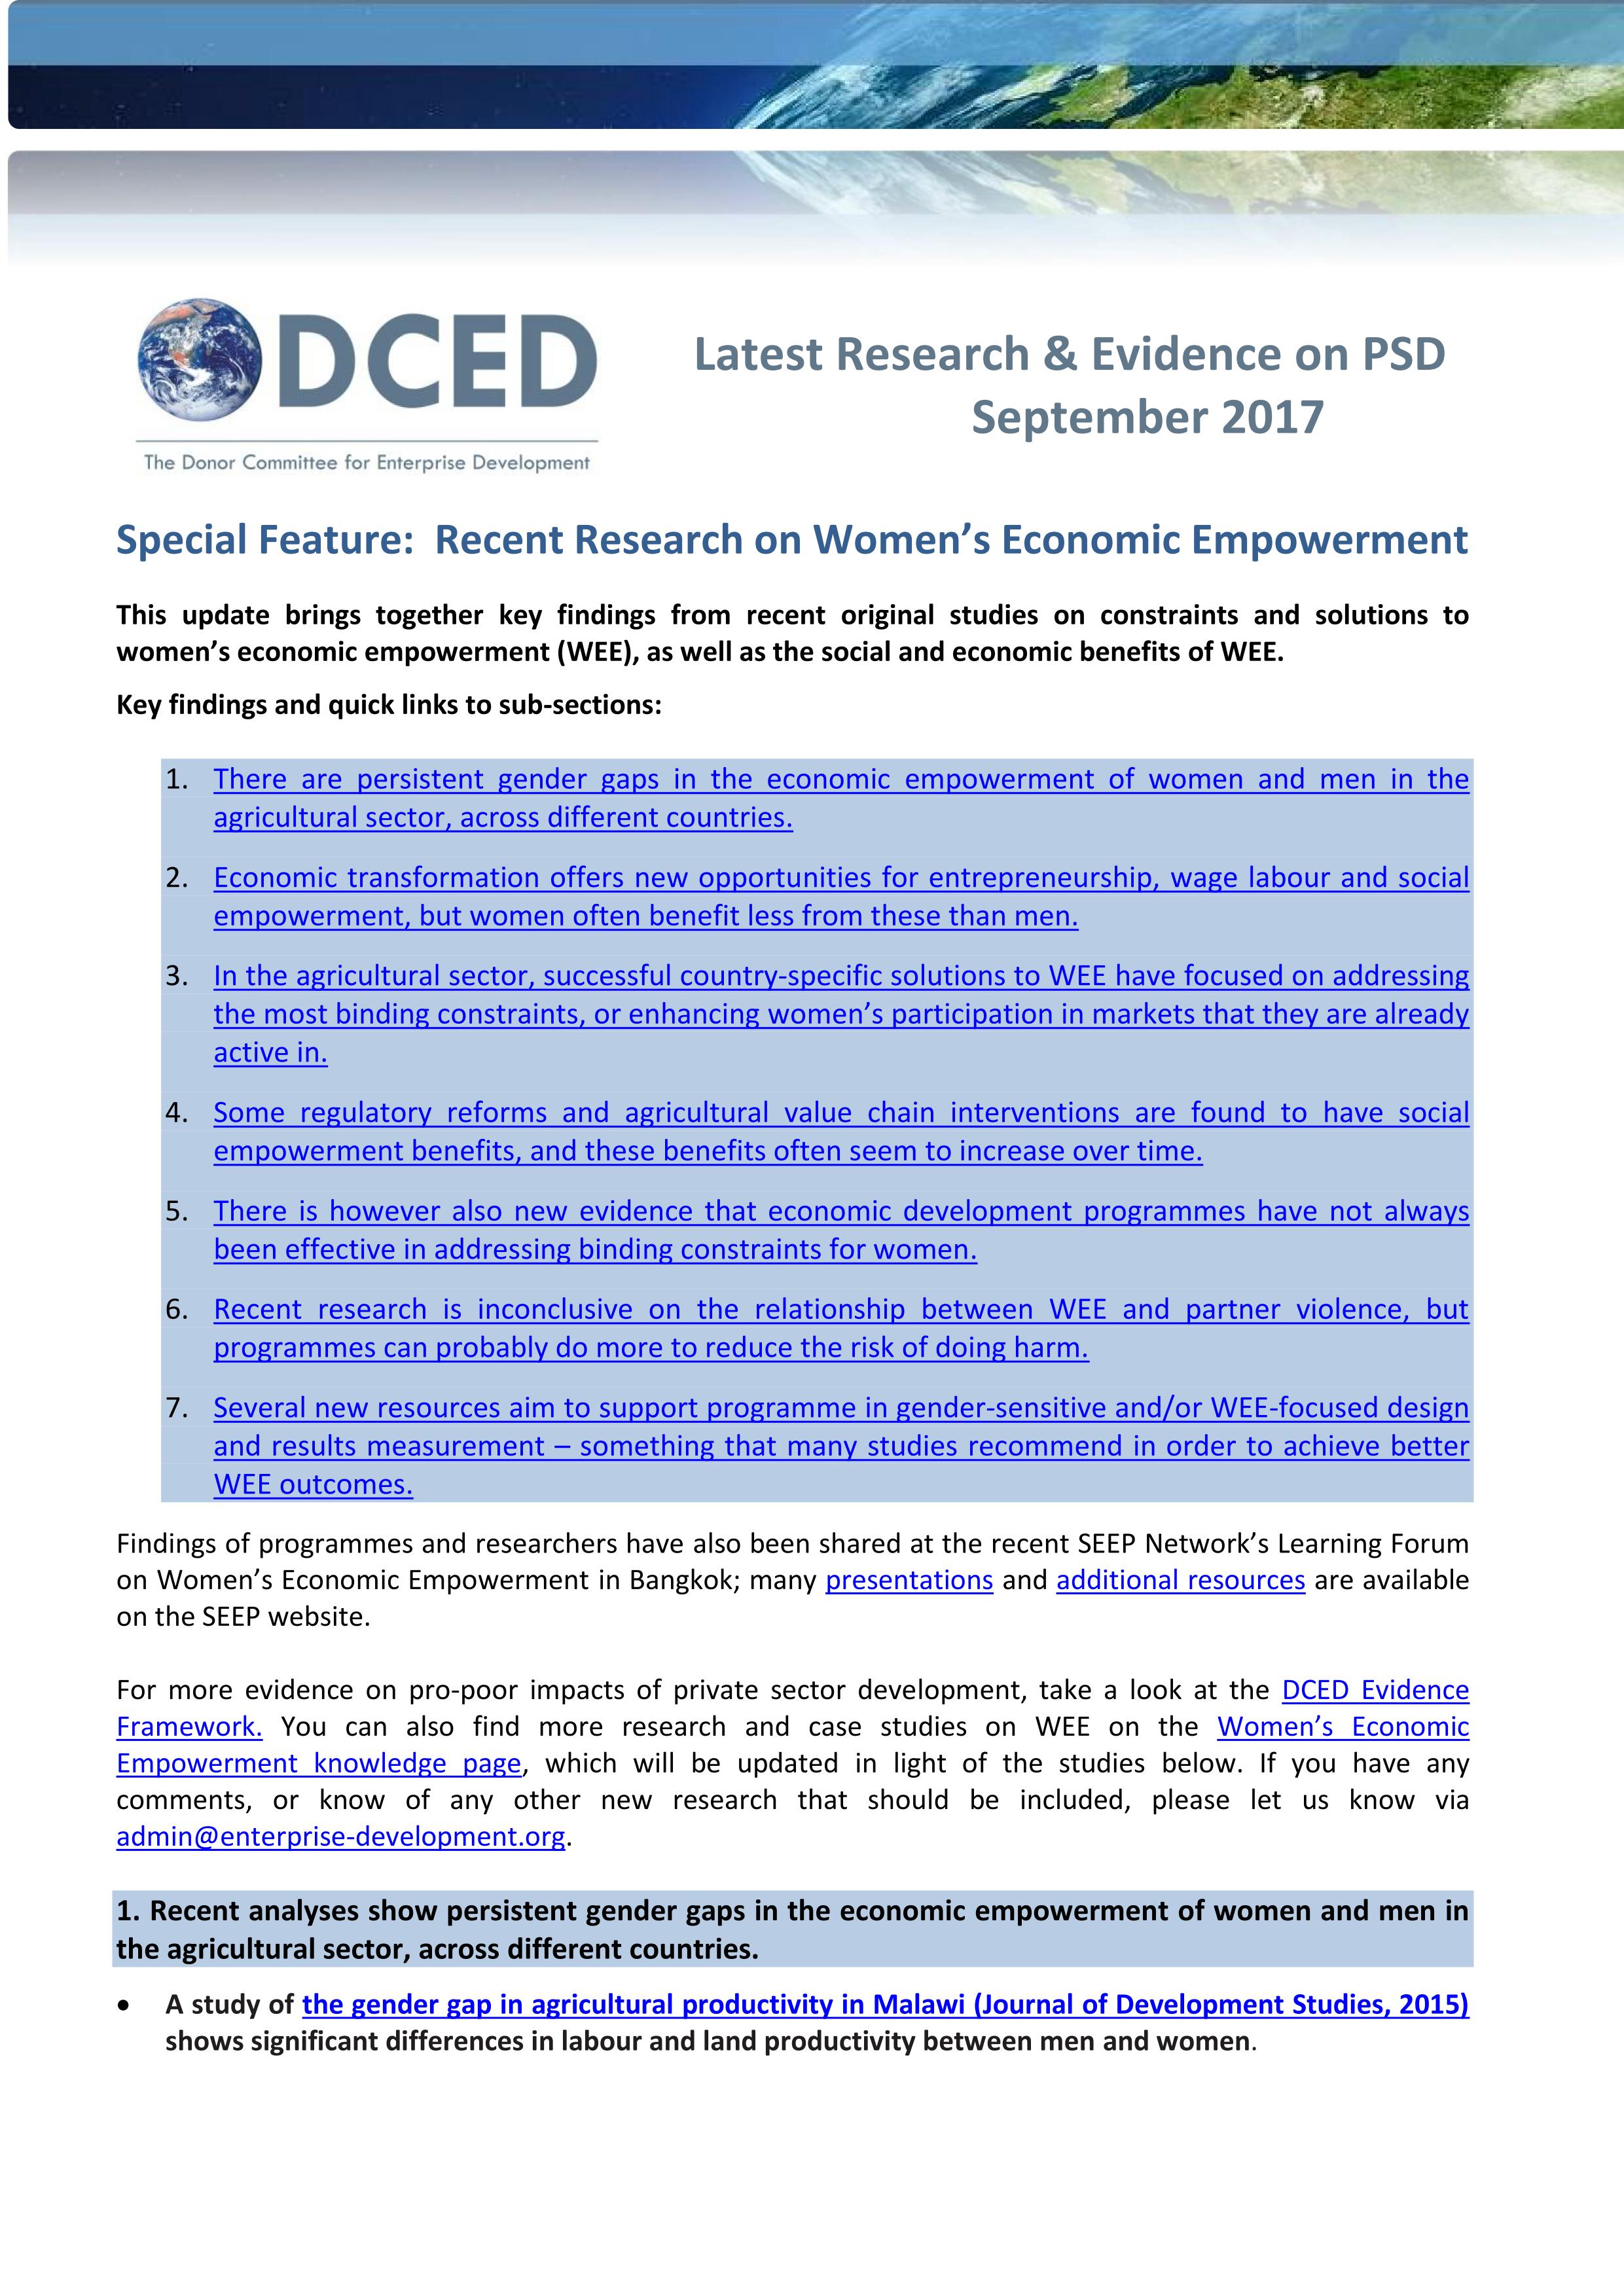 DCED Latest Research and Evidenceon PSD Special Feature WEE 2017